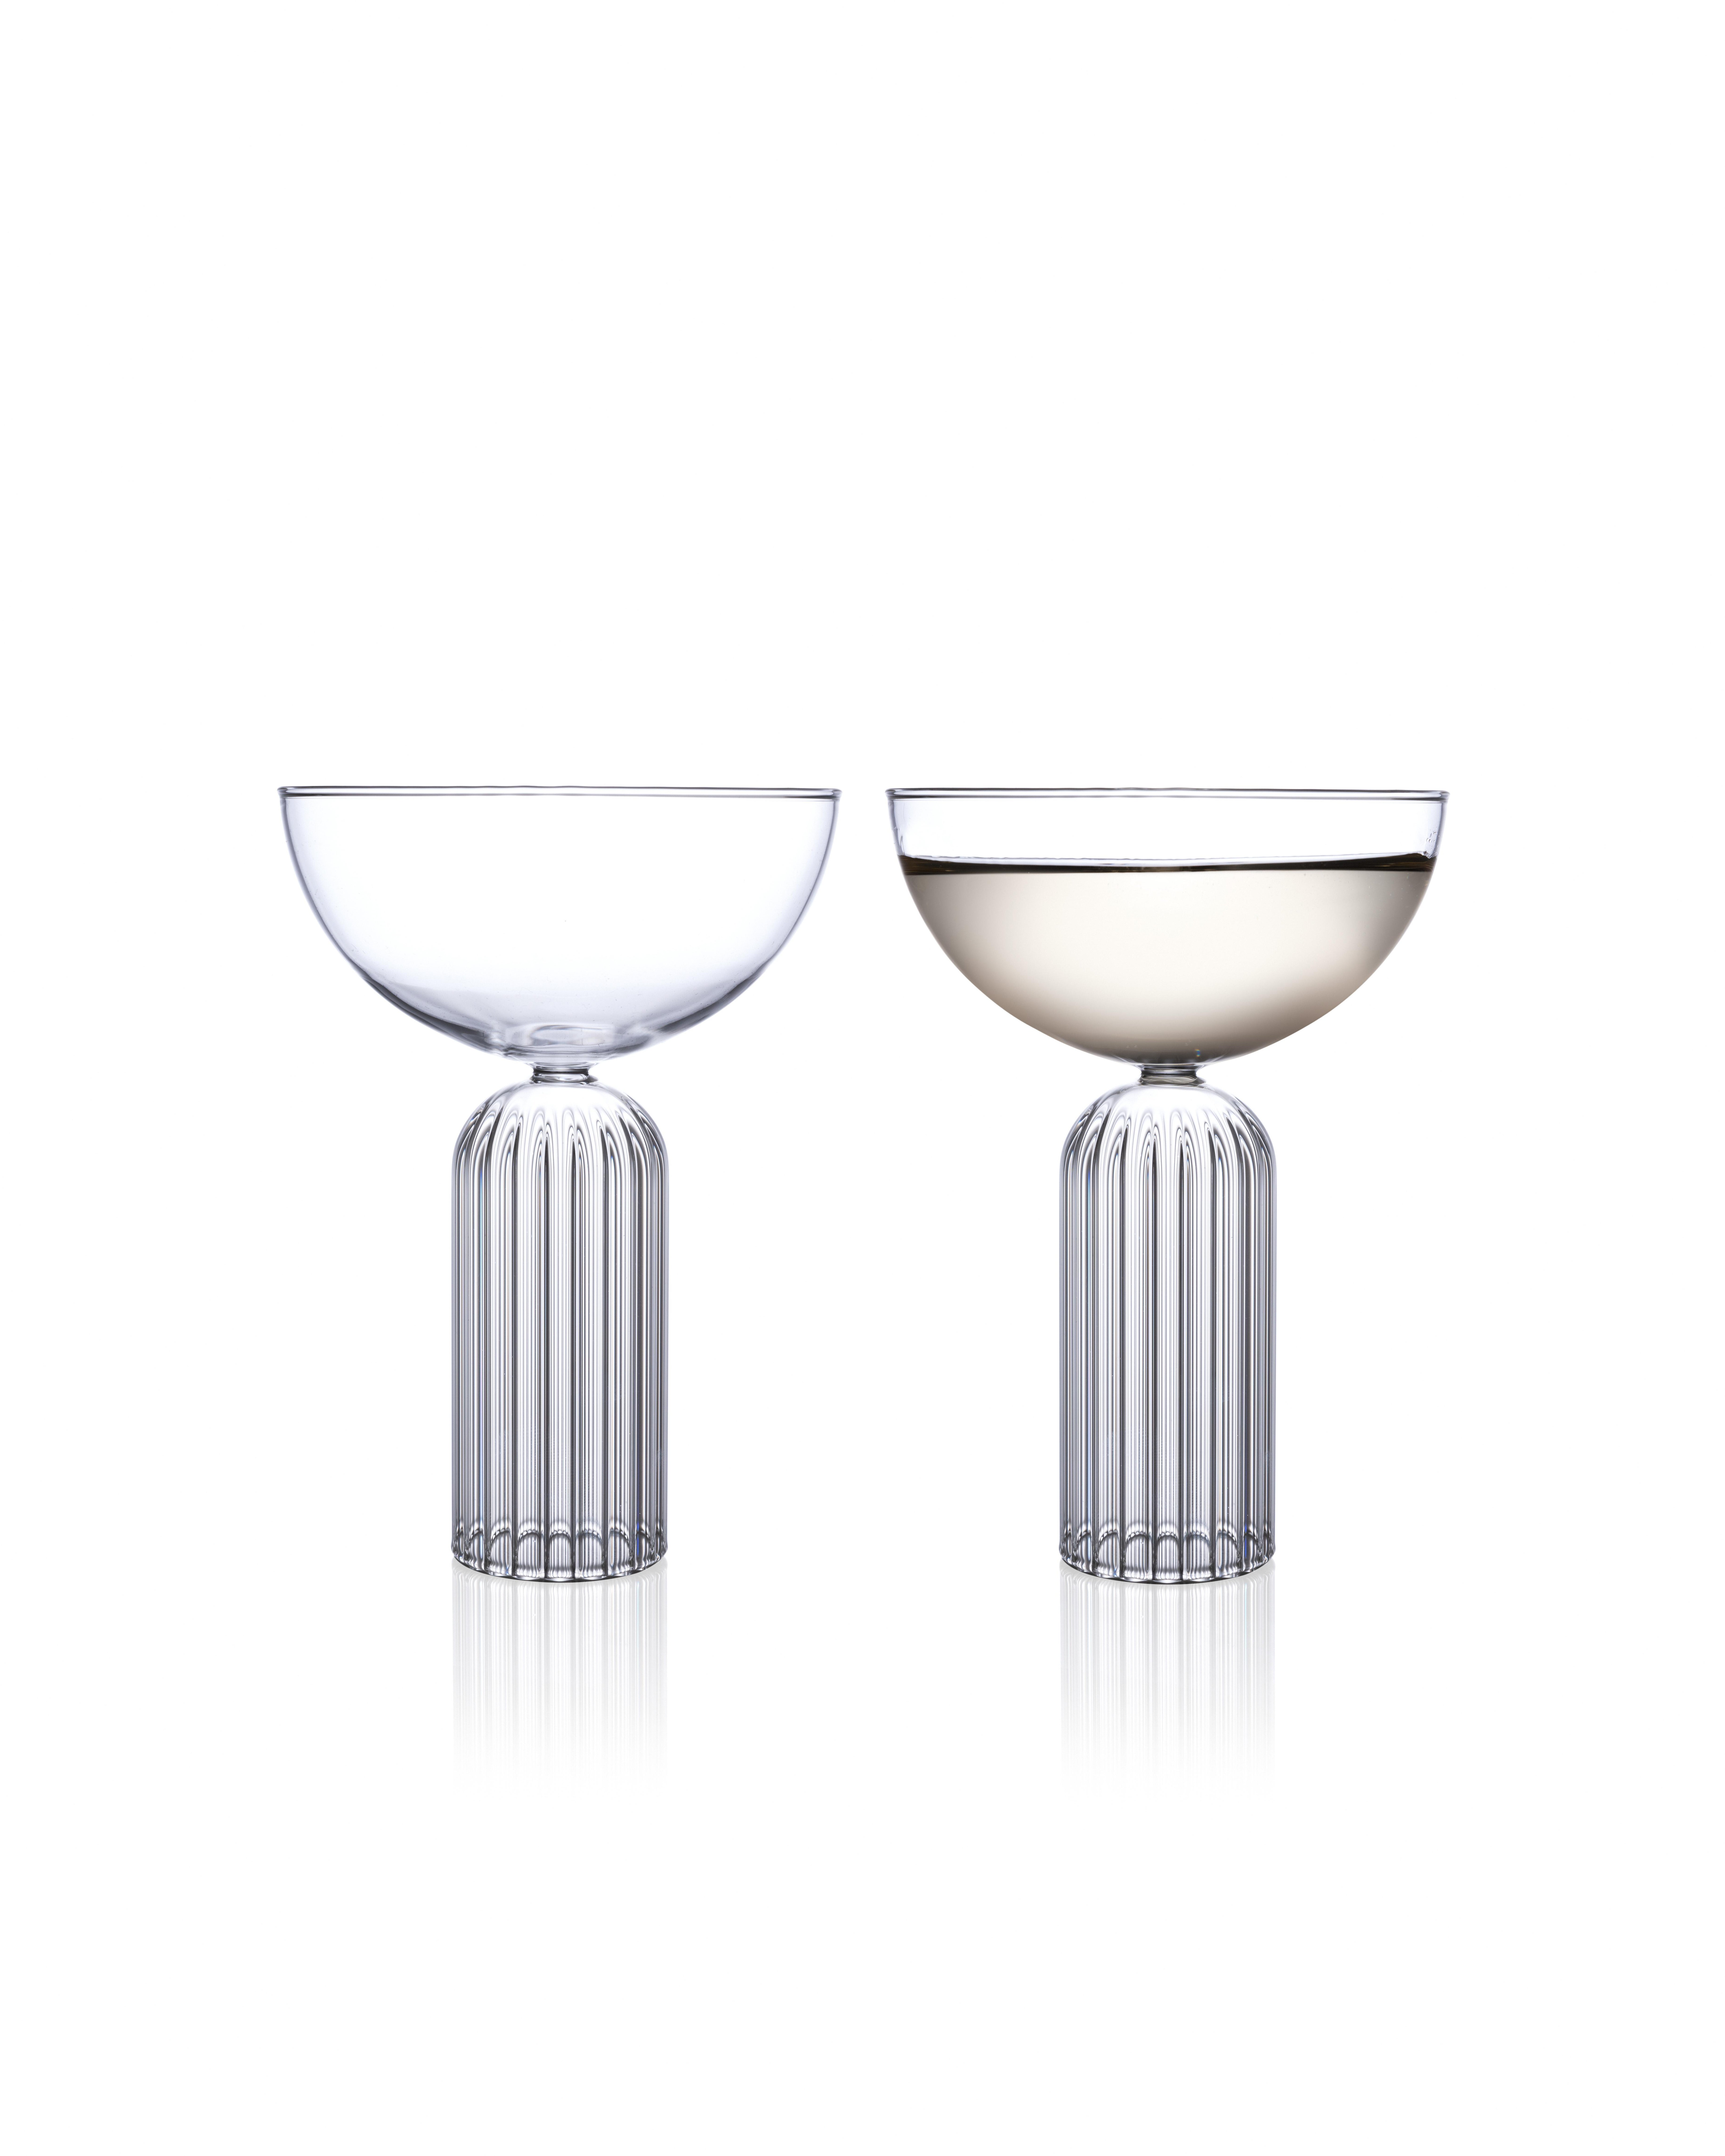 May Coupe of the May Collection is a classic champagne glass with a modern silhouette. Designed for and named after Ferrone’s favorite month of the year, when the season transitions from spring to summer, the pinched wasp-like transition point